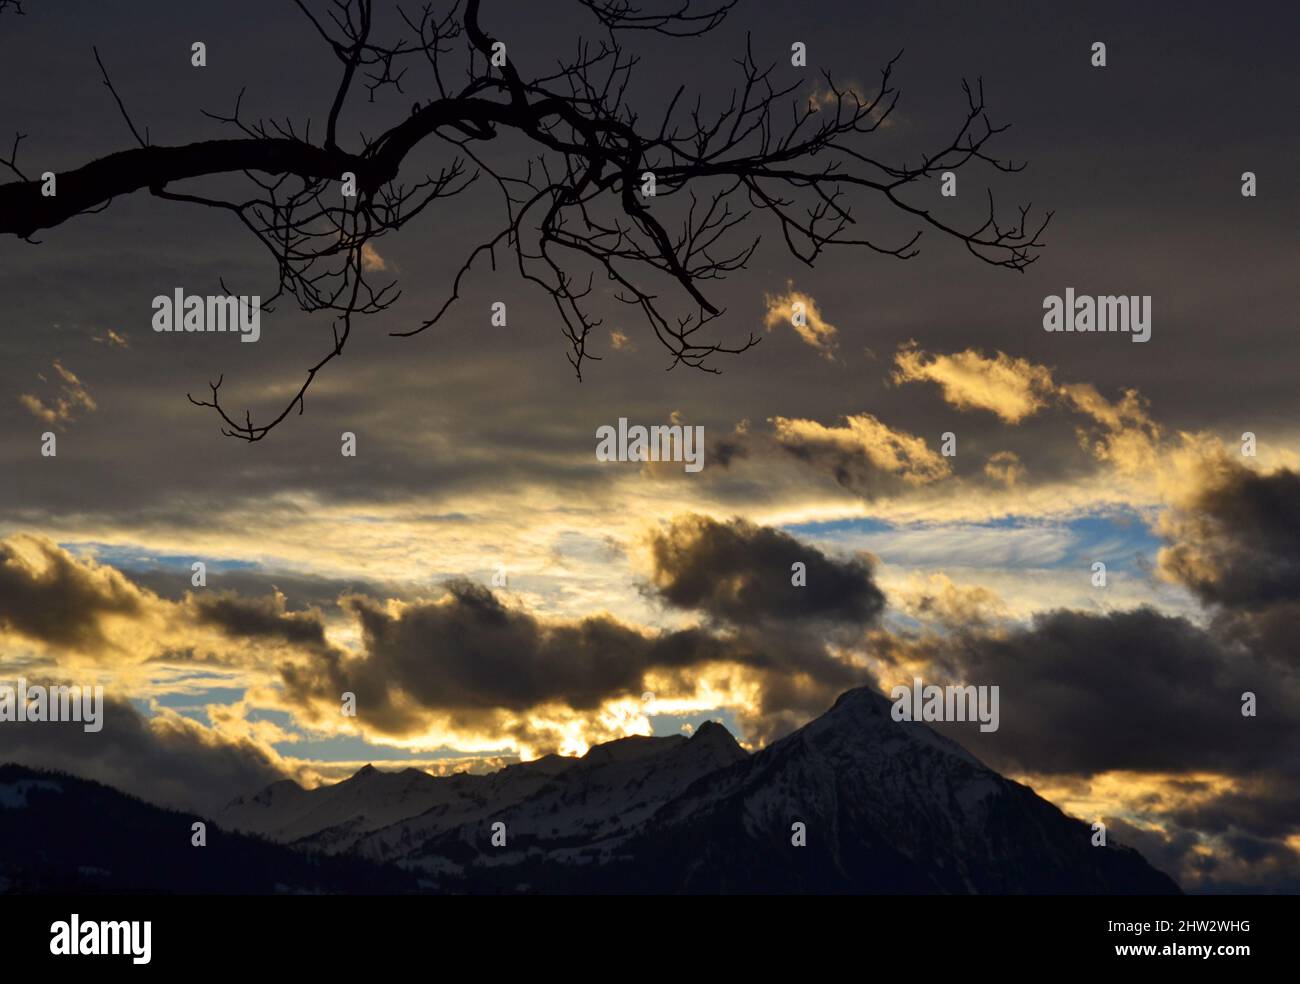 Tree branches over sunset sky background Stock Photo